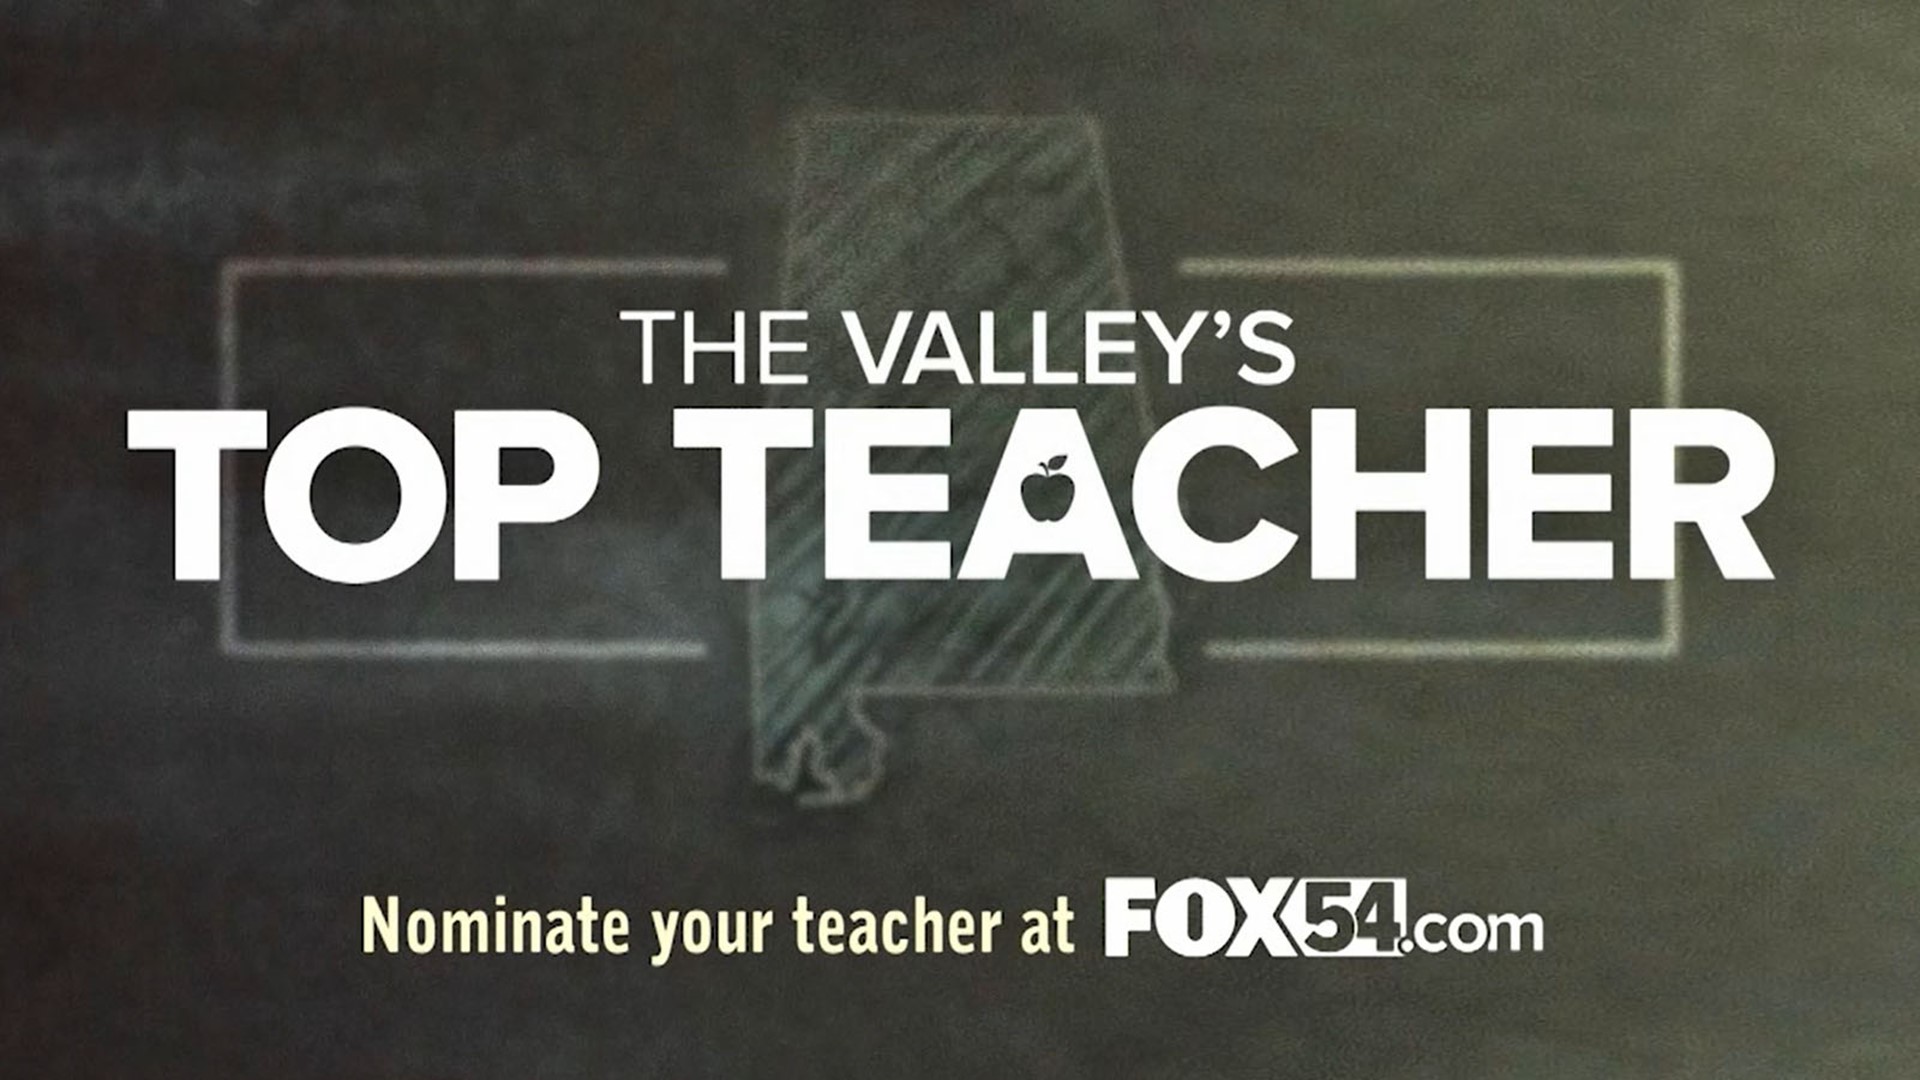 Nominate a special teacher to be featured as the Valley's Top Teacher on the FOX54 News